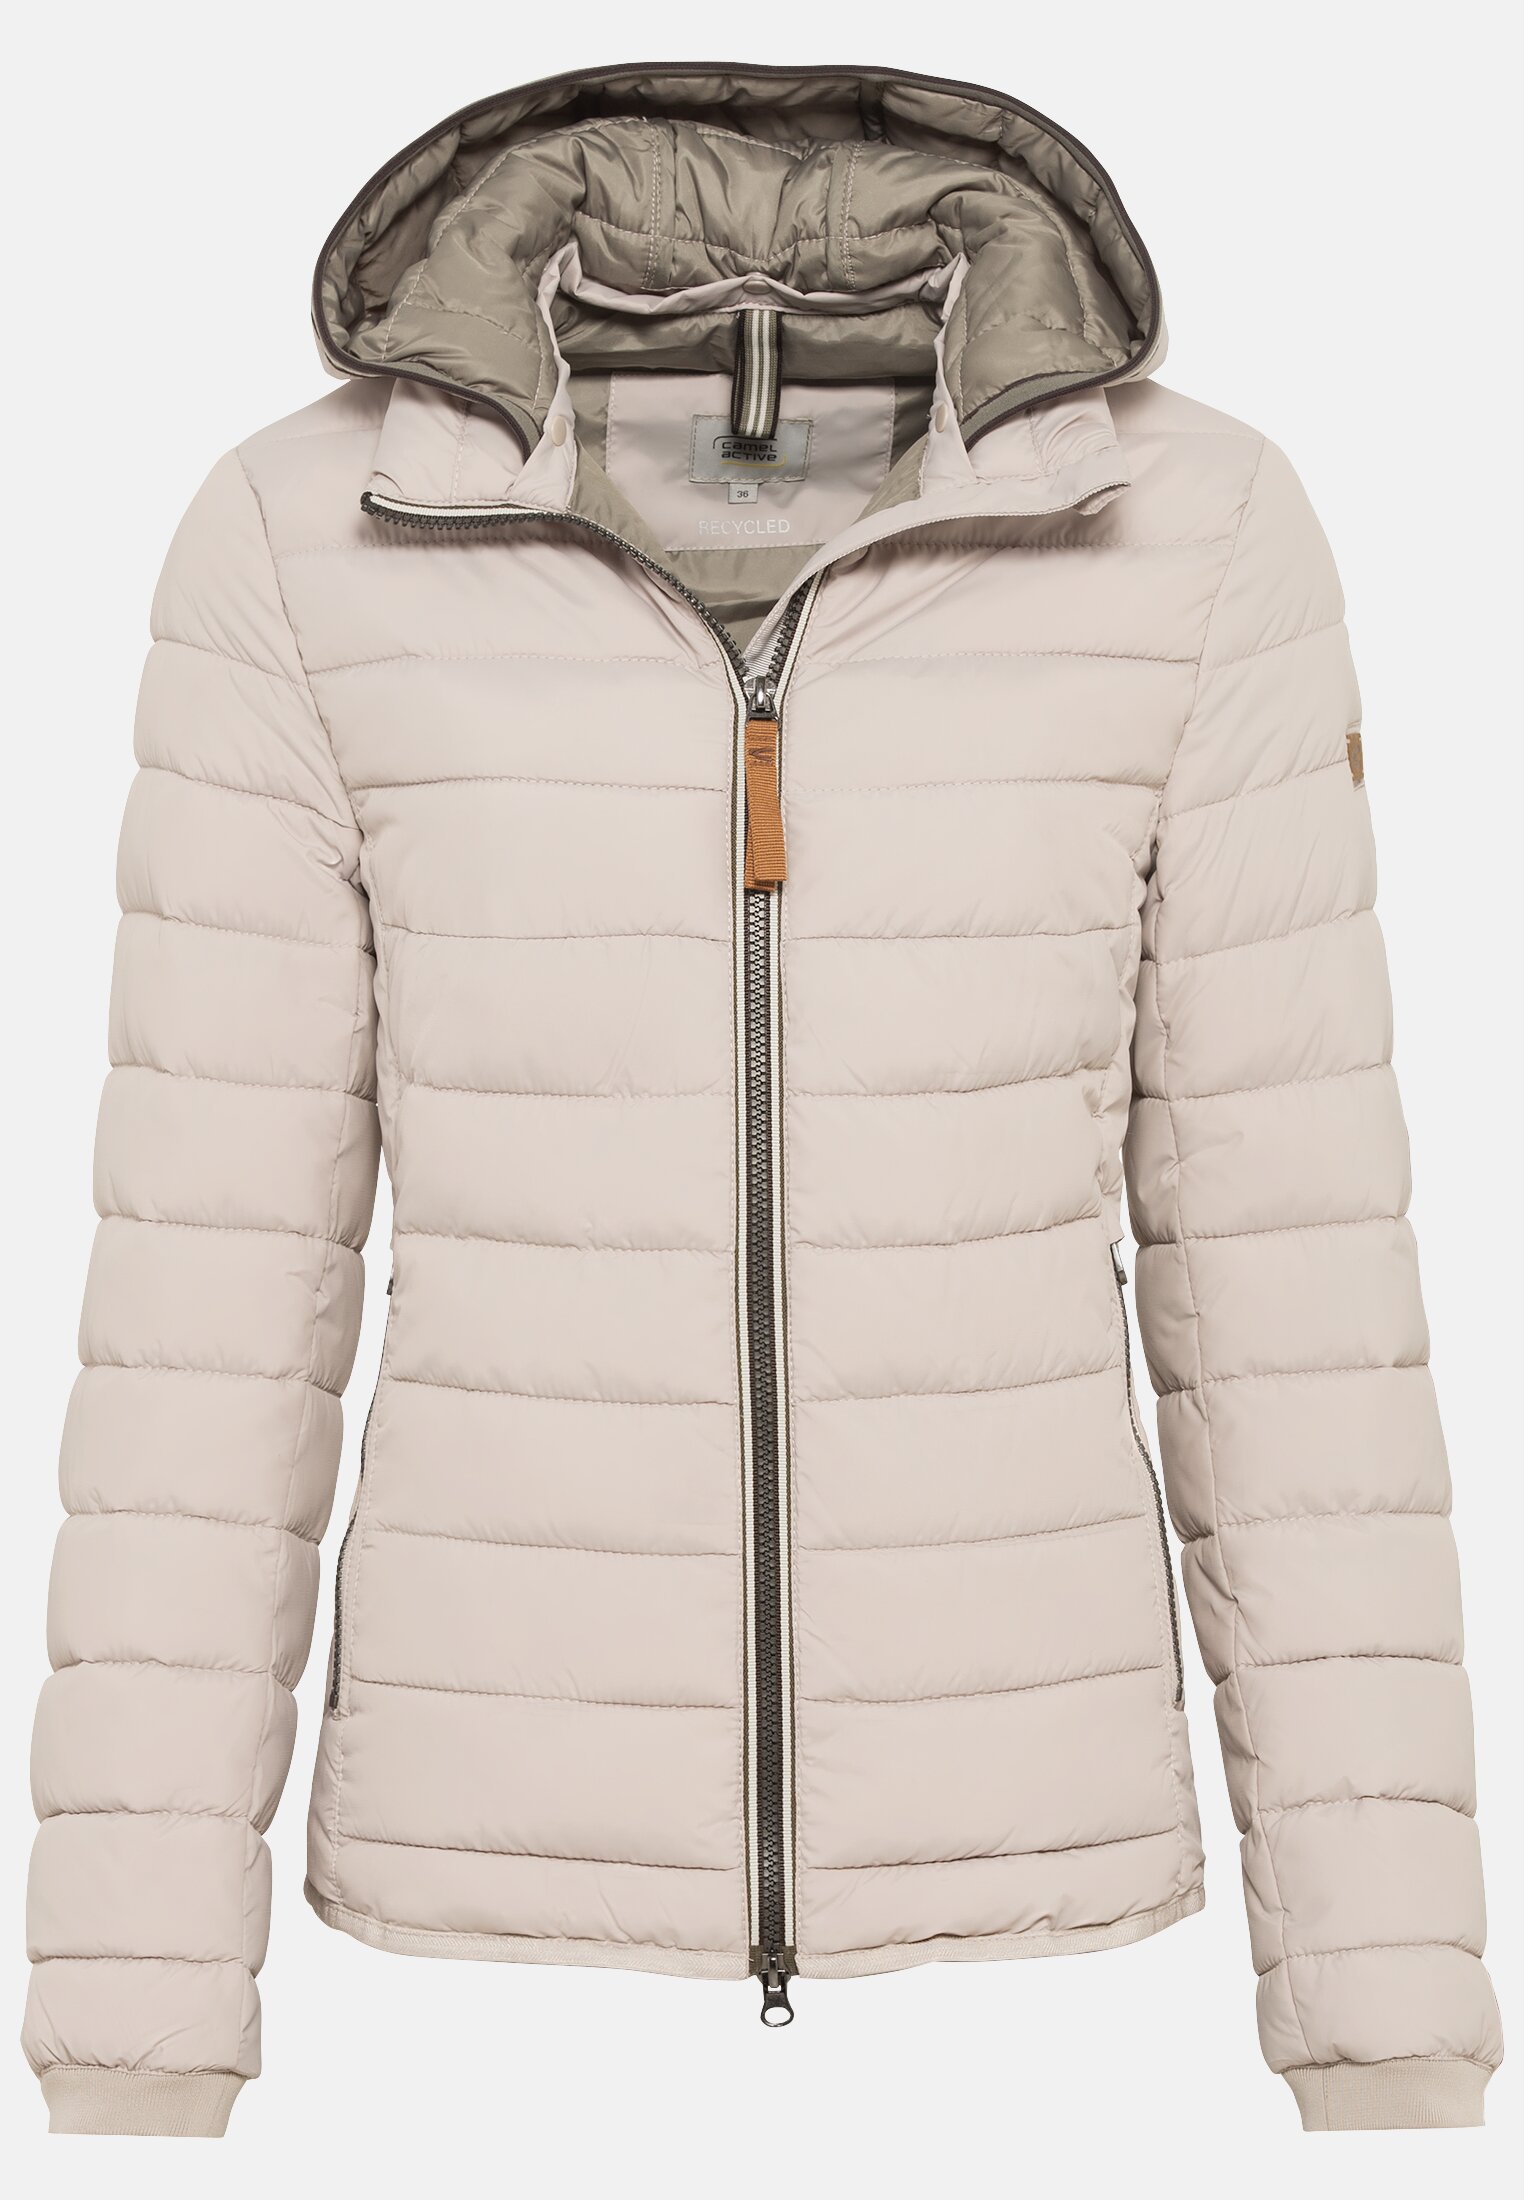 Quilted jacket for | 34 camel | in Almond Damen active